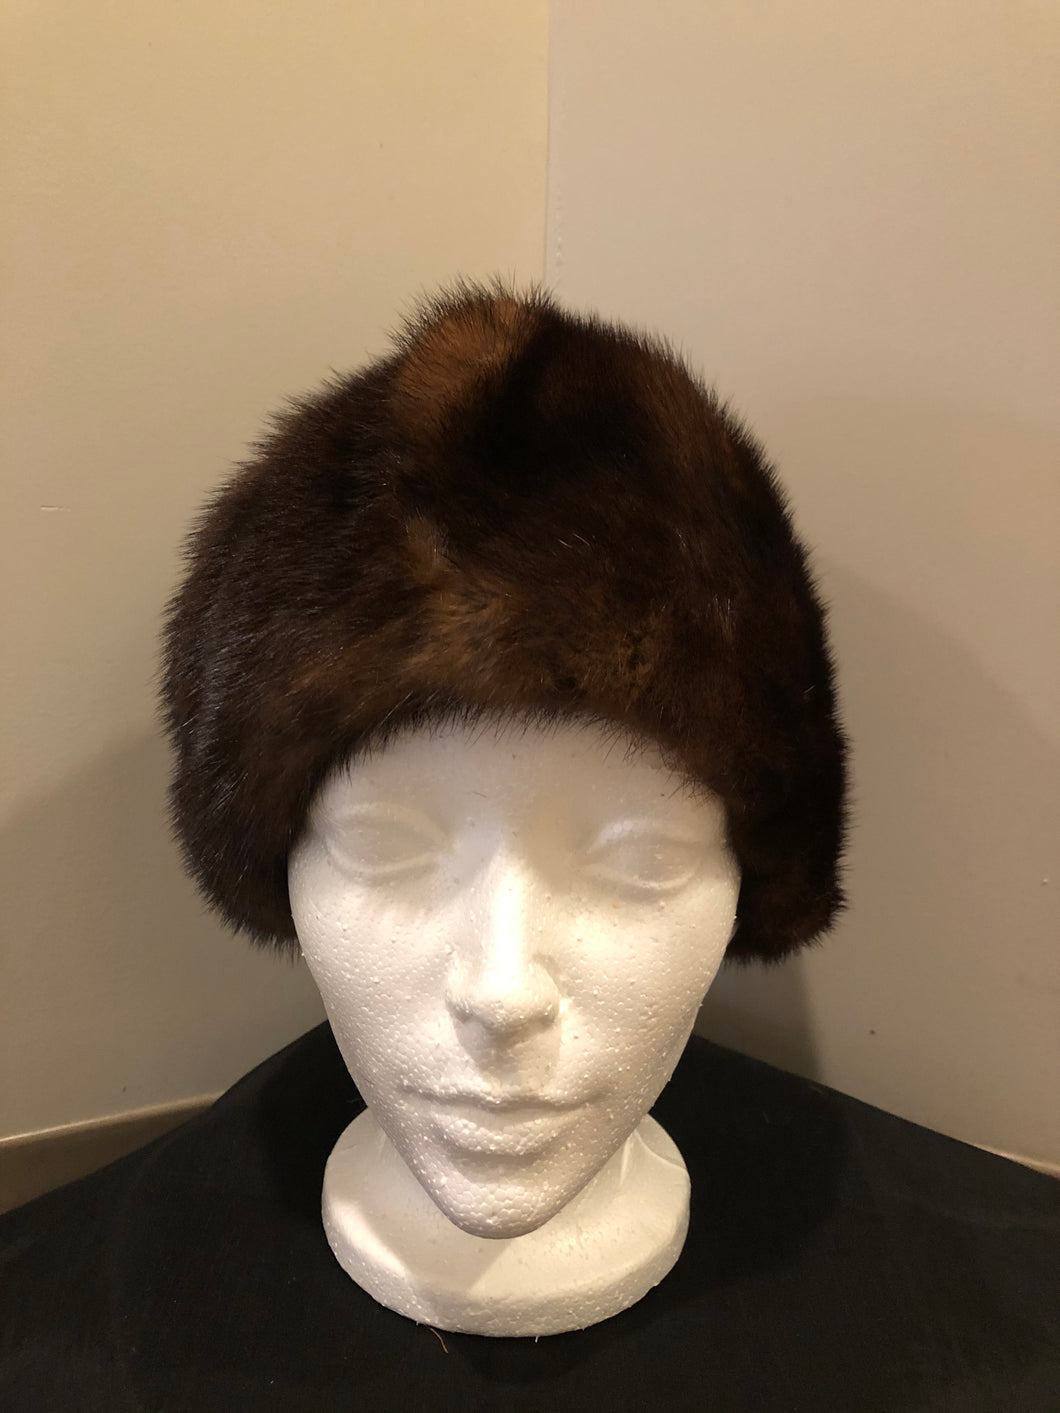 Kingspier Vintage - Vintage dark brown fur hat. Interior is lined .Size small.

This hat is in excellent condition.